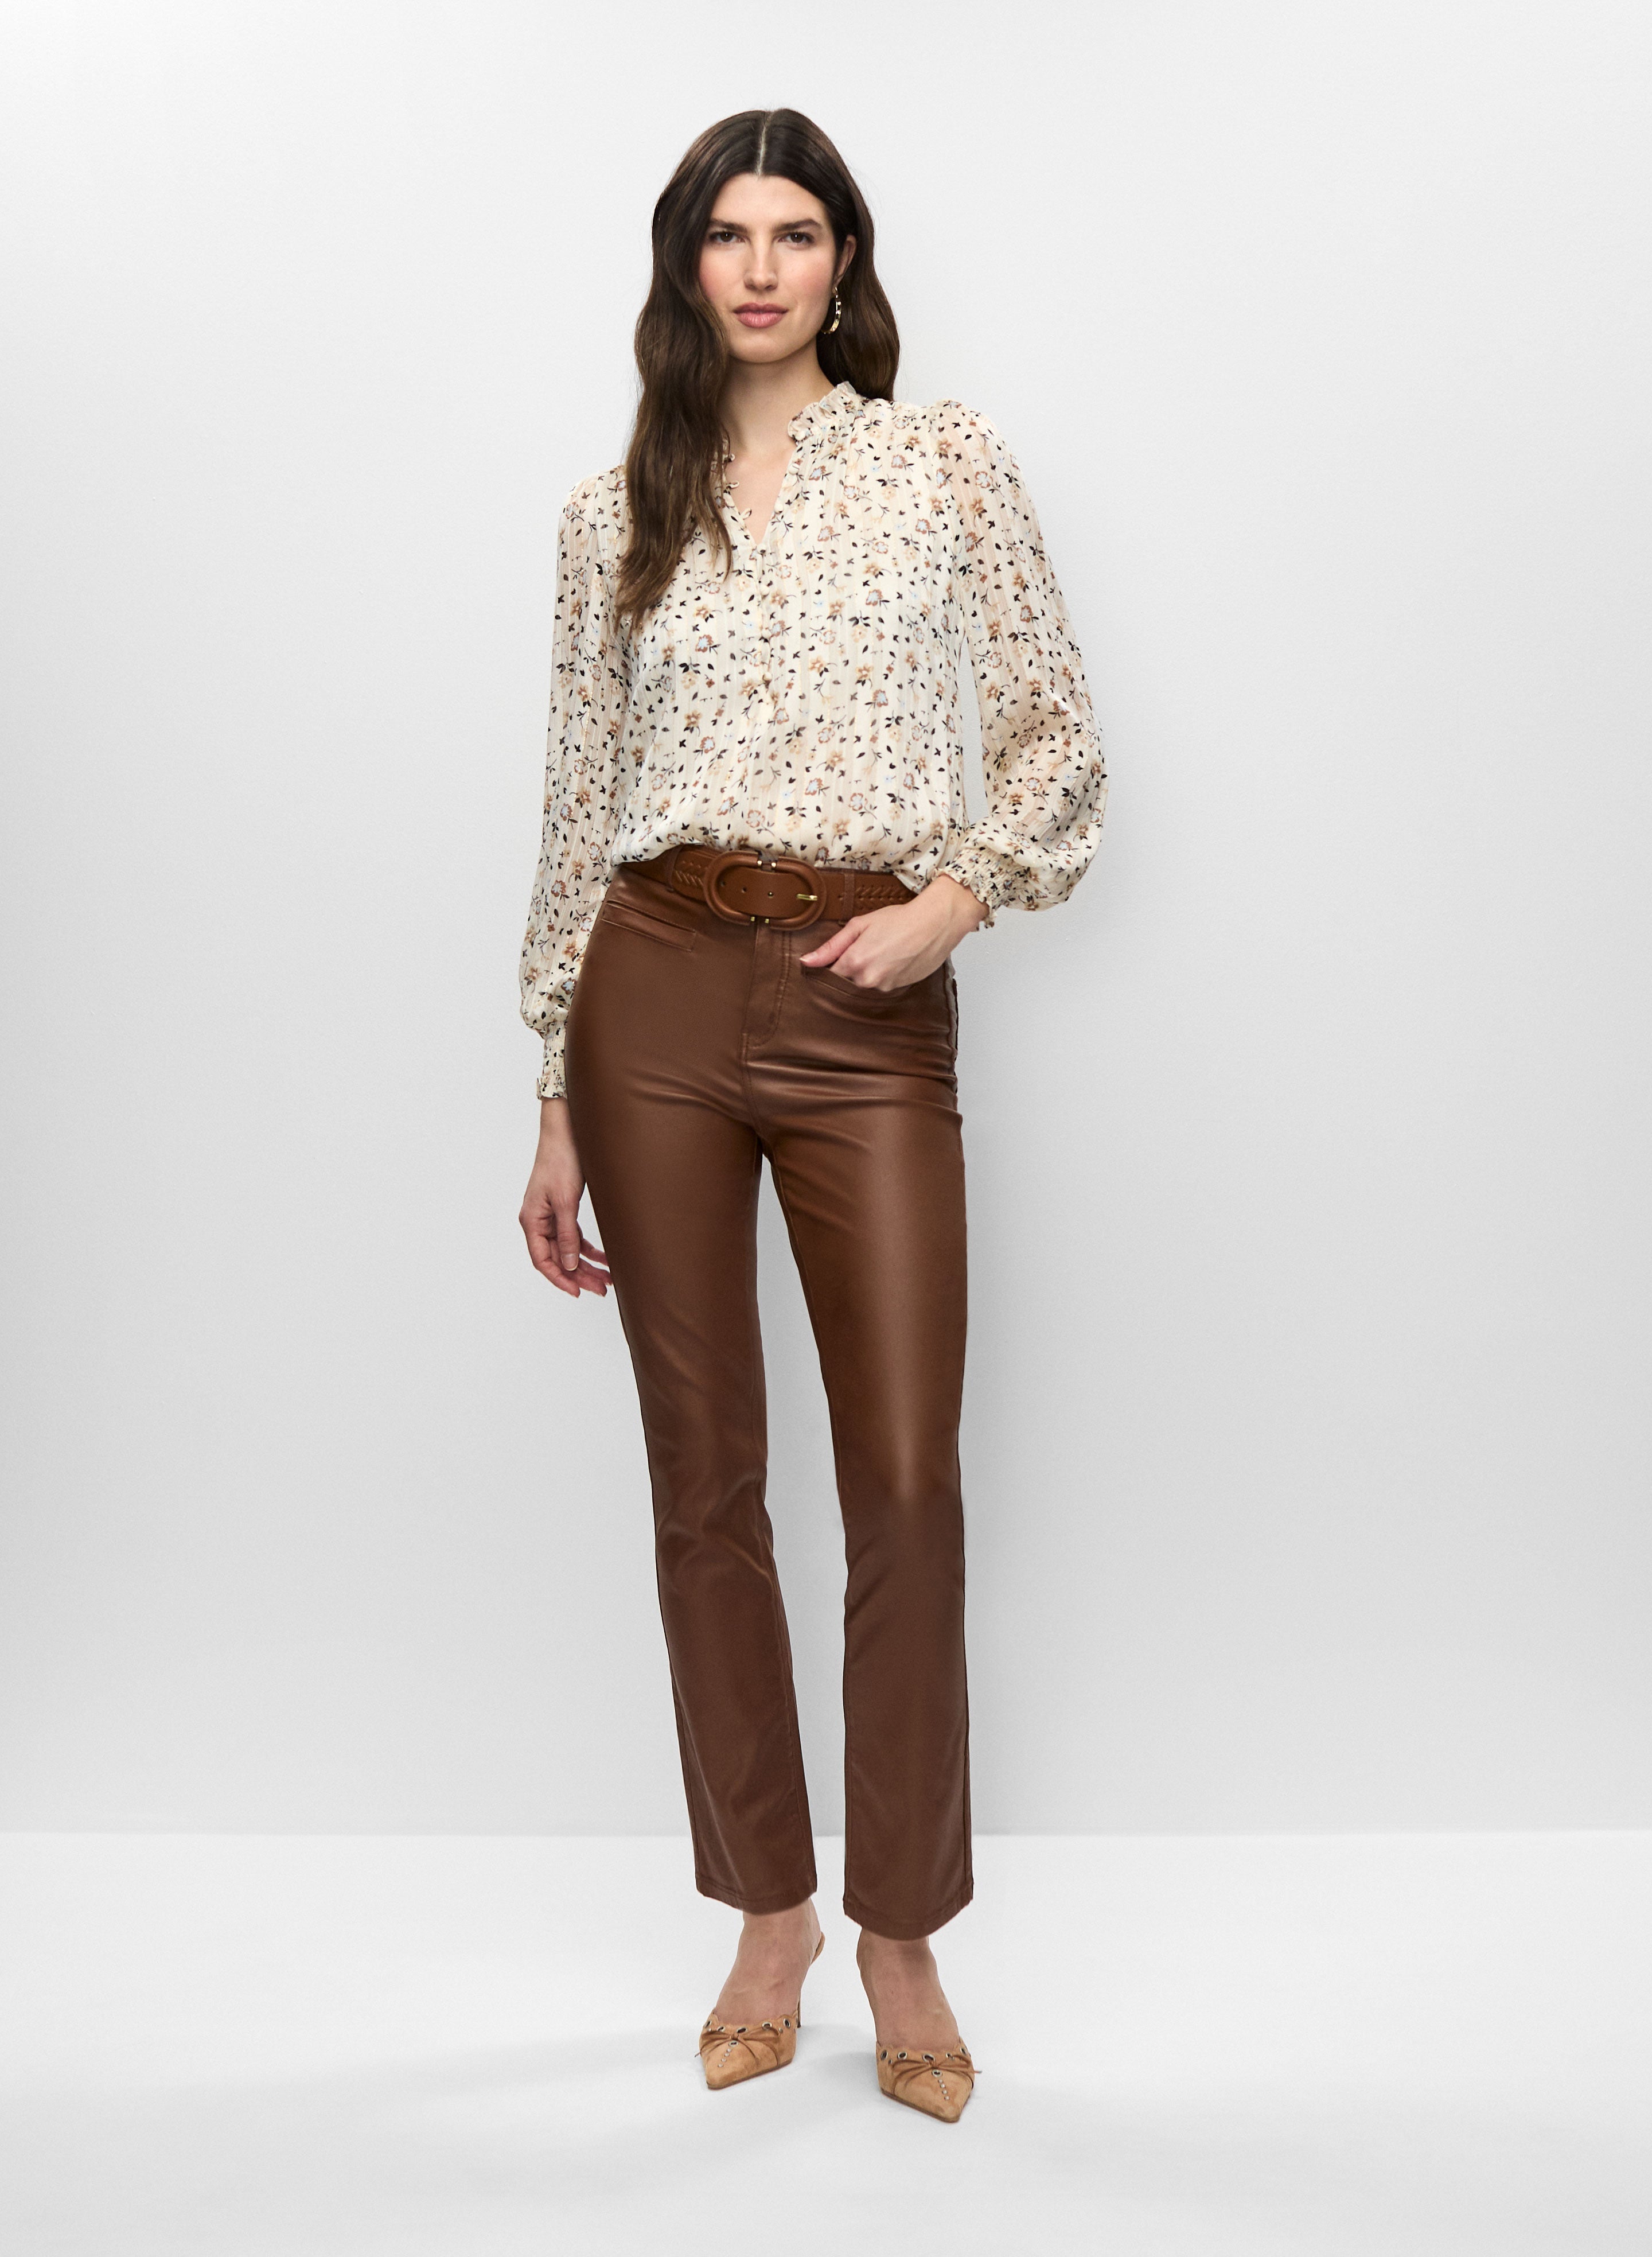 Floral Blouse & Coated Jeans